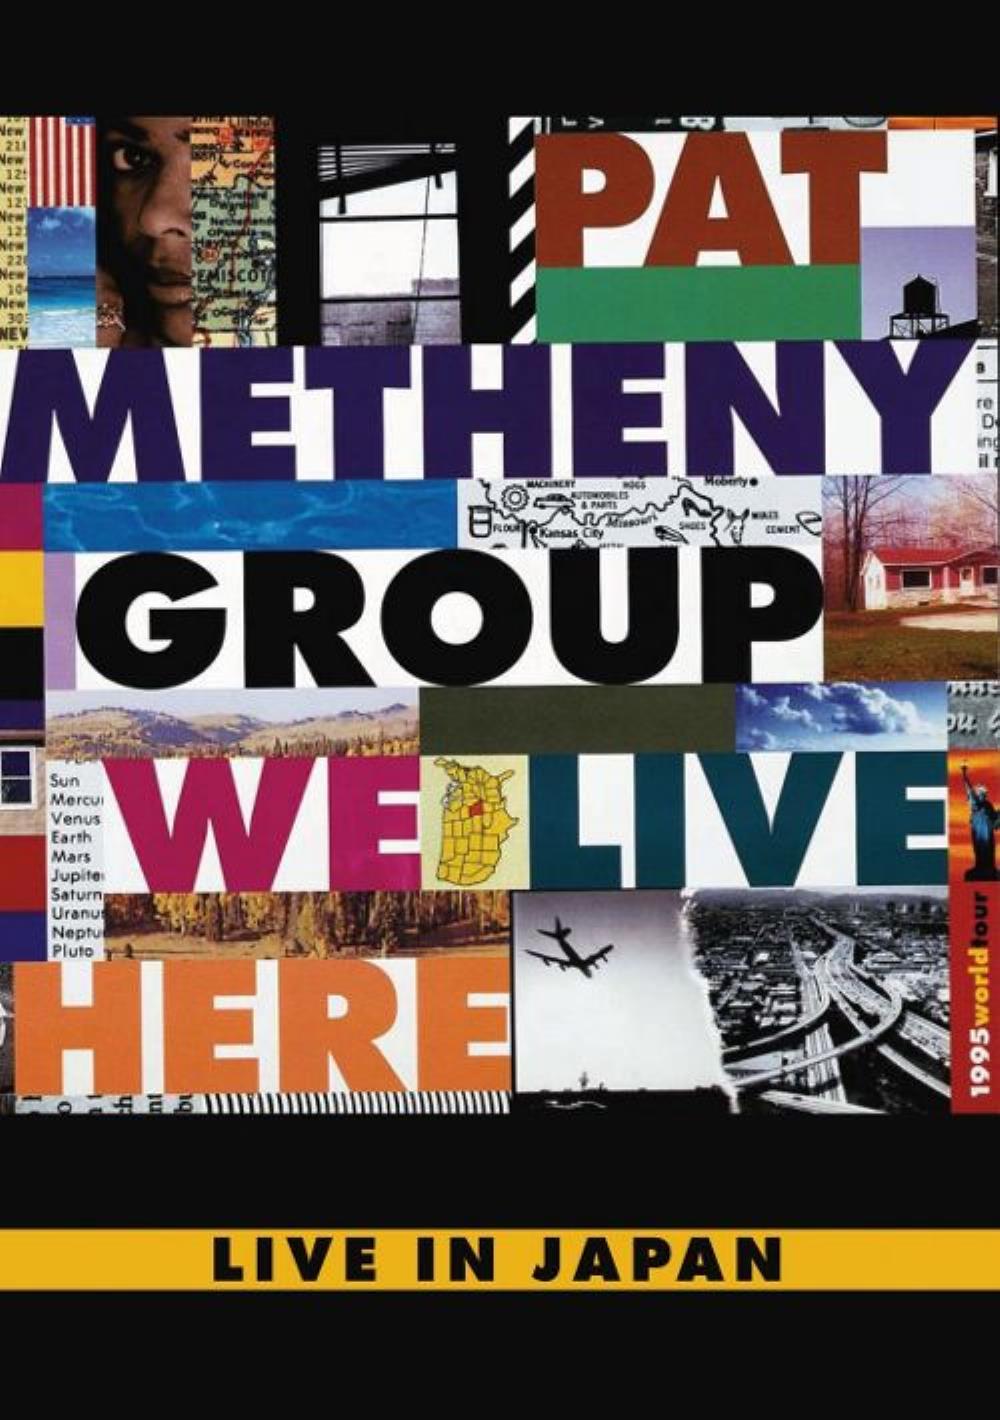 Pat Metheny We Live Here - Live in Japan album cover